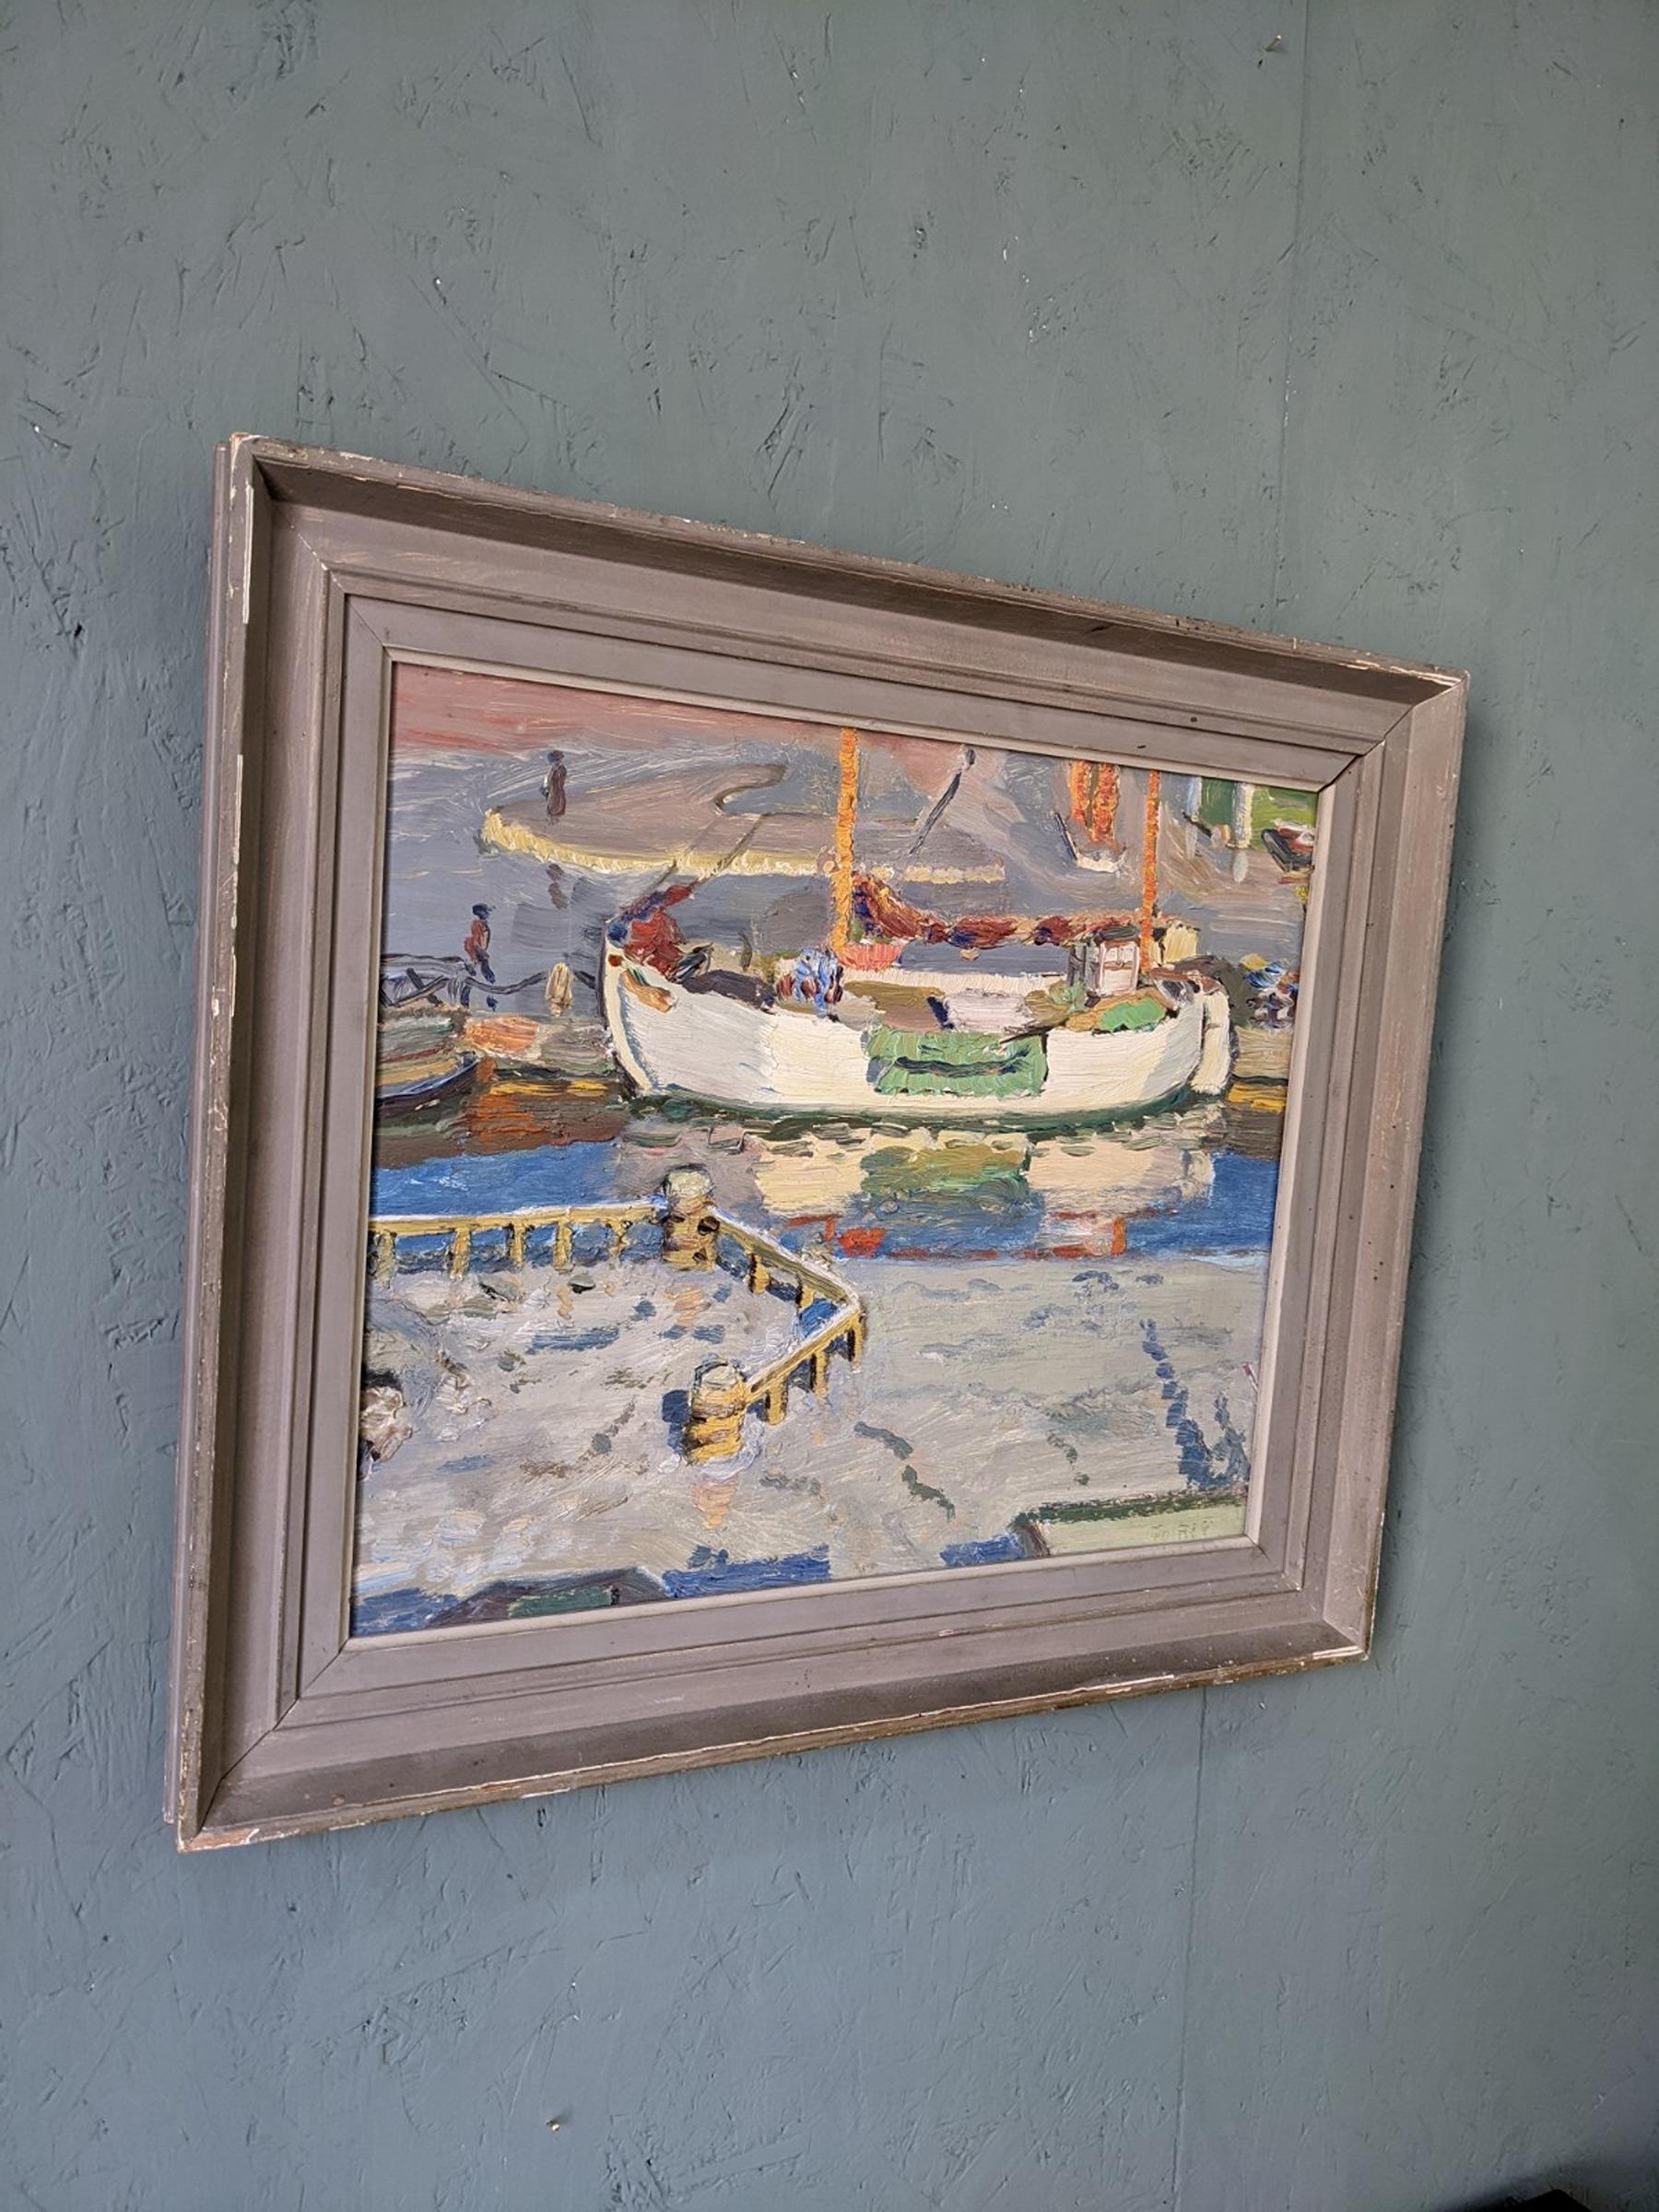 THE DOCK
Size: 49 x 57 cm (including frame)
Oil on canvas 

An expressive mid century modernist composition of a dockside, executed in oil onto board.

A large white boat that punctuates the center of the painting has just docked, and on the left,